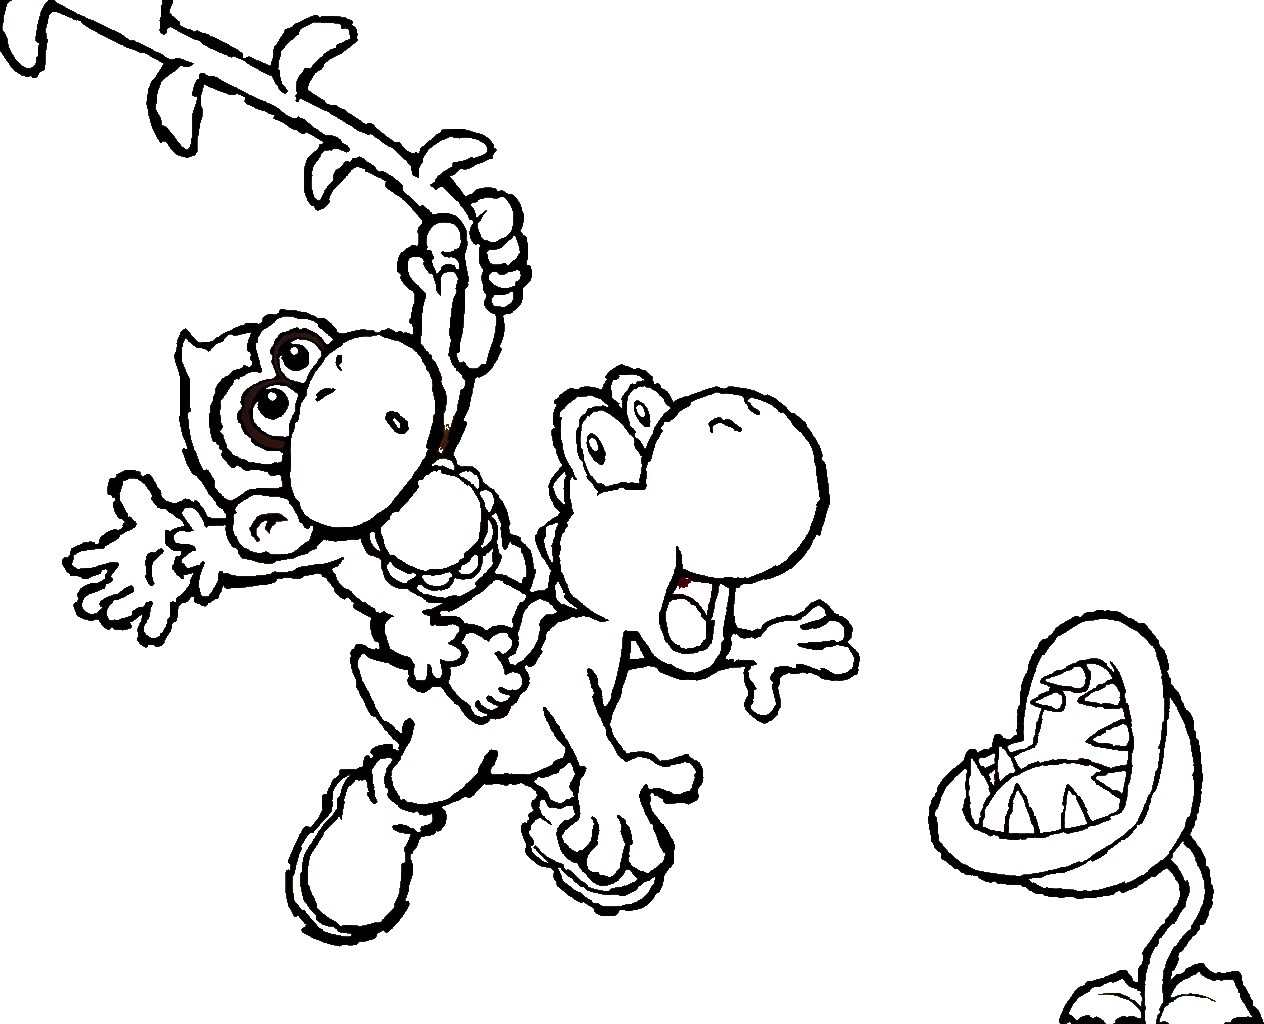 Drawing Yoshi 20 Video Games – Printable coloring pages